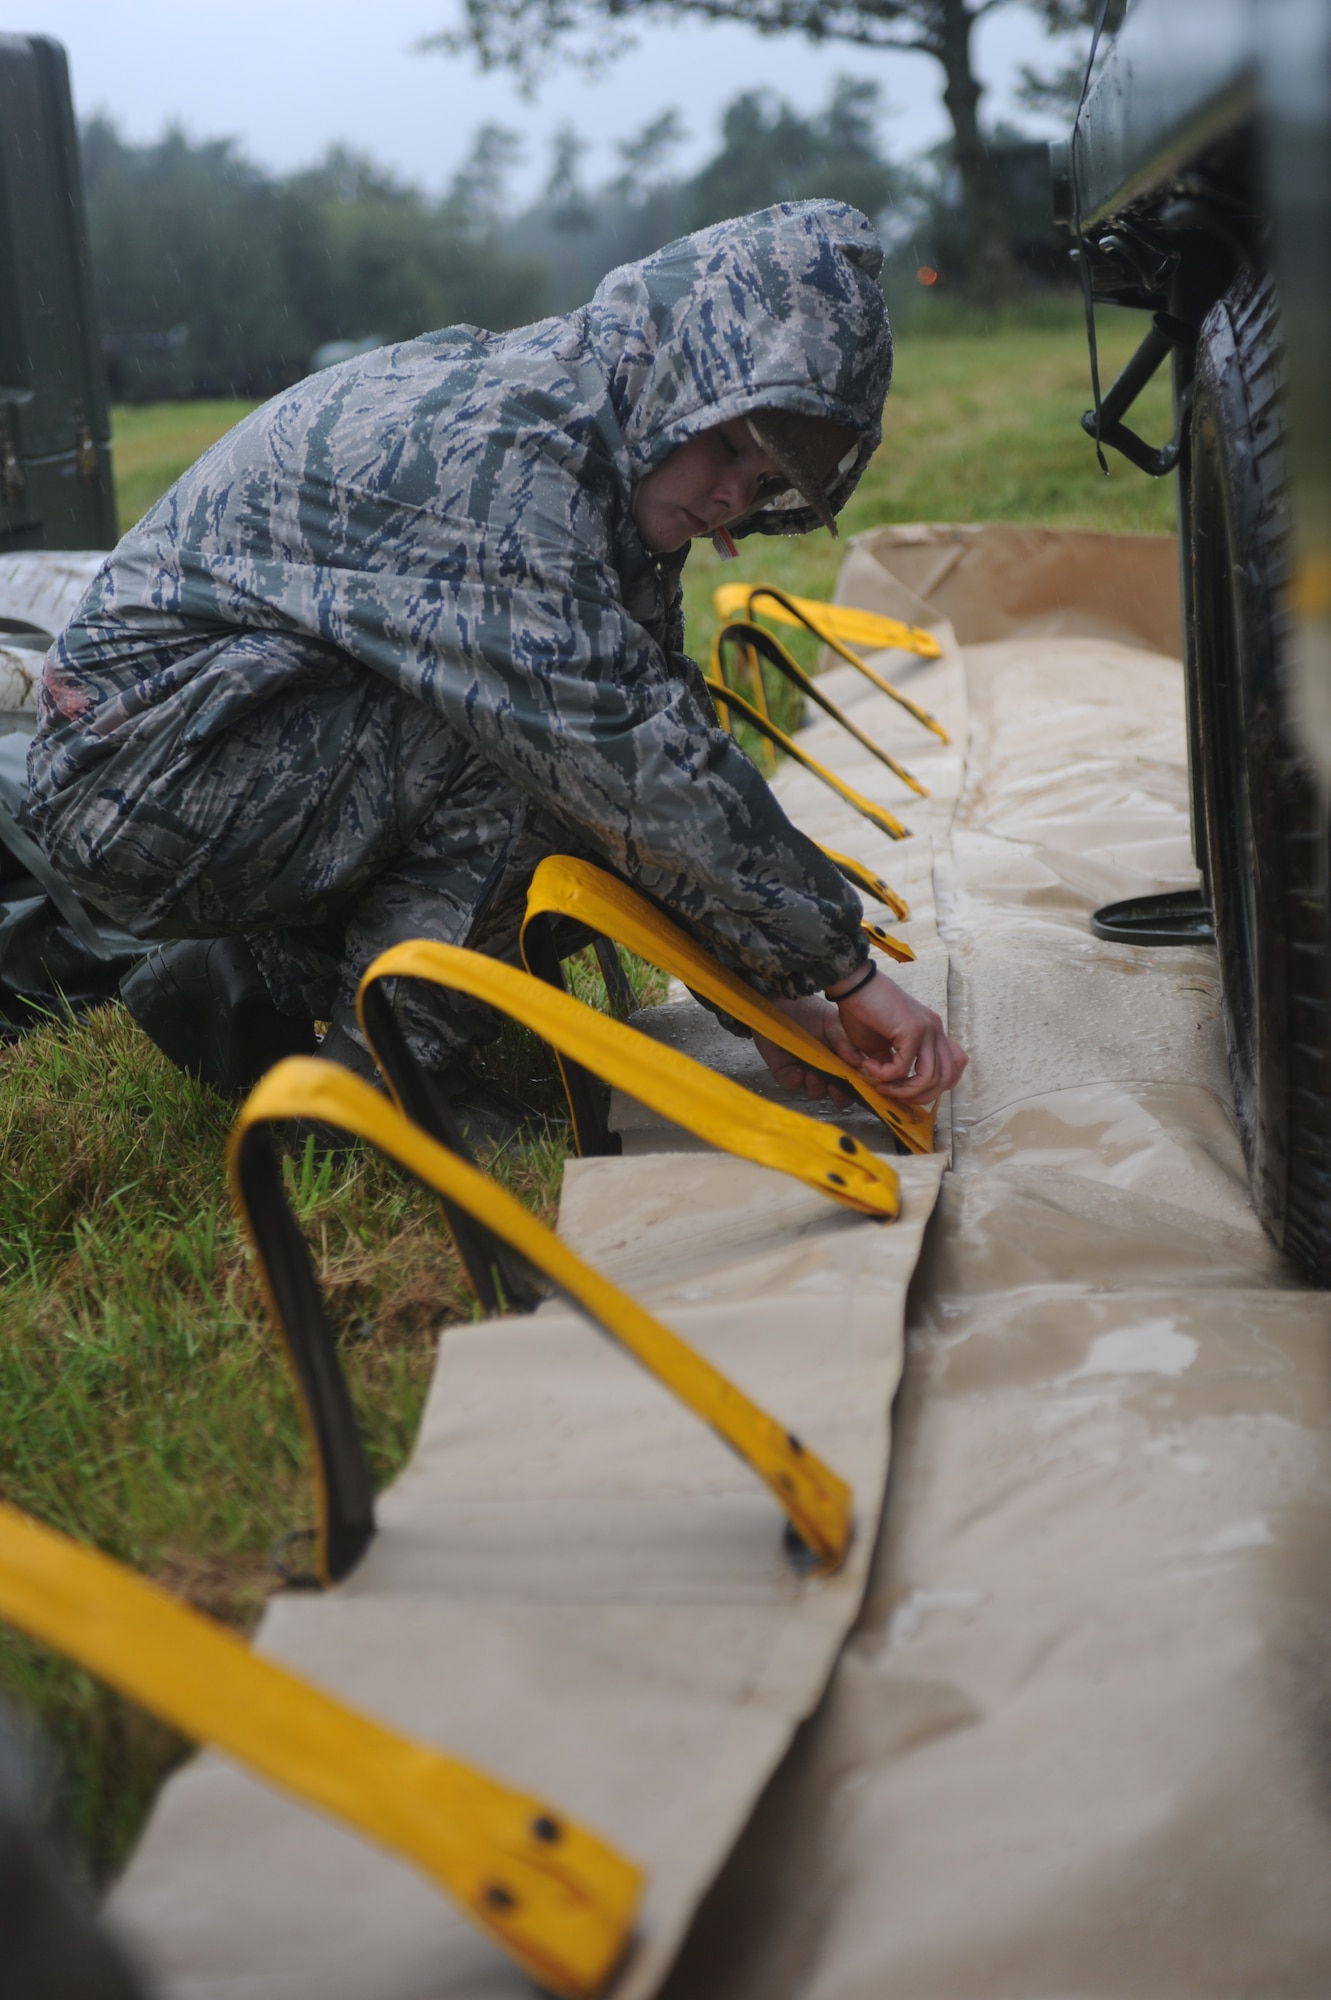 GEROLSTEIN, Germany – Senior Airman Caley Jett, 606th Air Control Squadron supply technician, sets up a protective mat that keeps diesel produced from generators from leaking into the soil during Eifel Strike 2012 July 12 here. Eifel Strike is an annual field training exercise in which Airmen build a controlled radar site, and a control and reporting center to work and live from for a week. Exercises like this help Spangdahlem Airmen prepare for contingency operations around the world. It also designed to give them the practice, skills and experience they need to deploy efficiently and effectively within a moment’s notice. (U.S. Air Force photo by Senior Airman Natasha Stannard/Released)